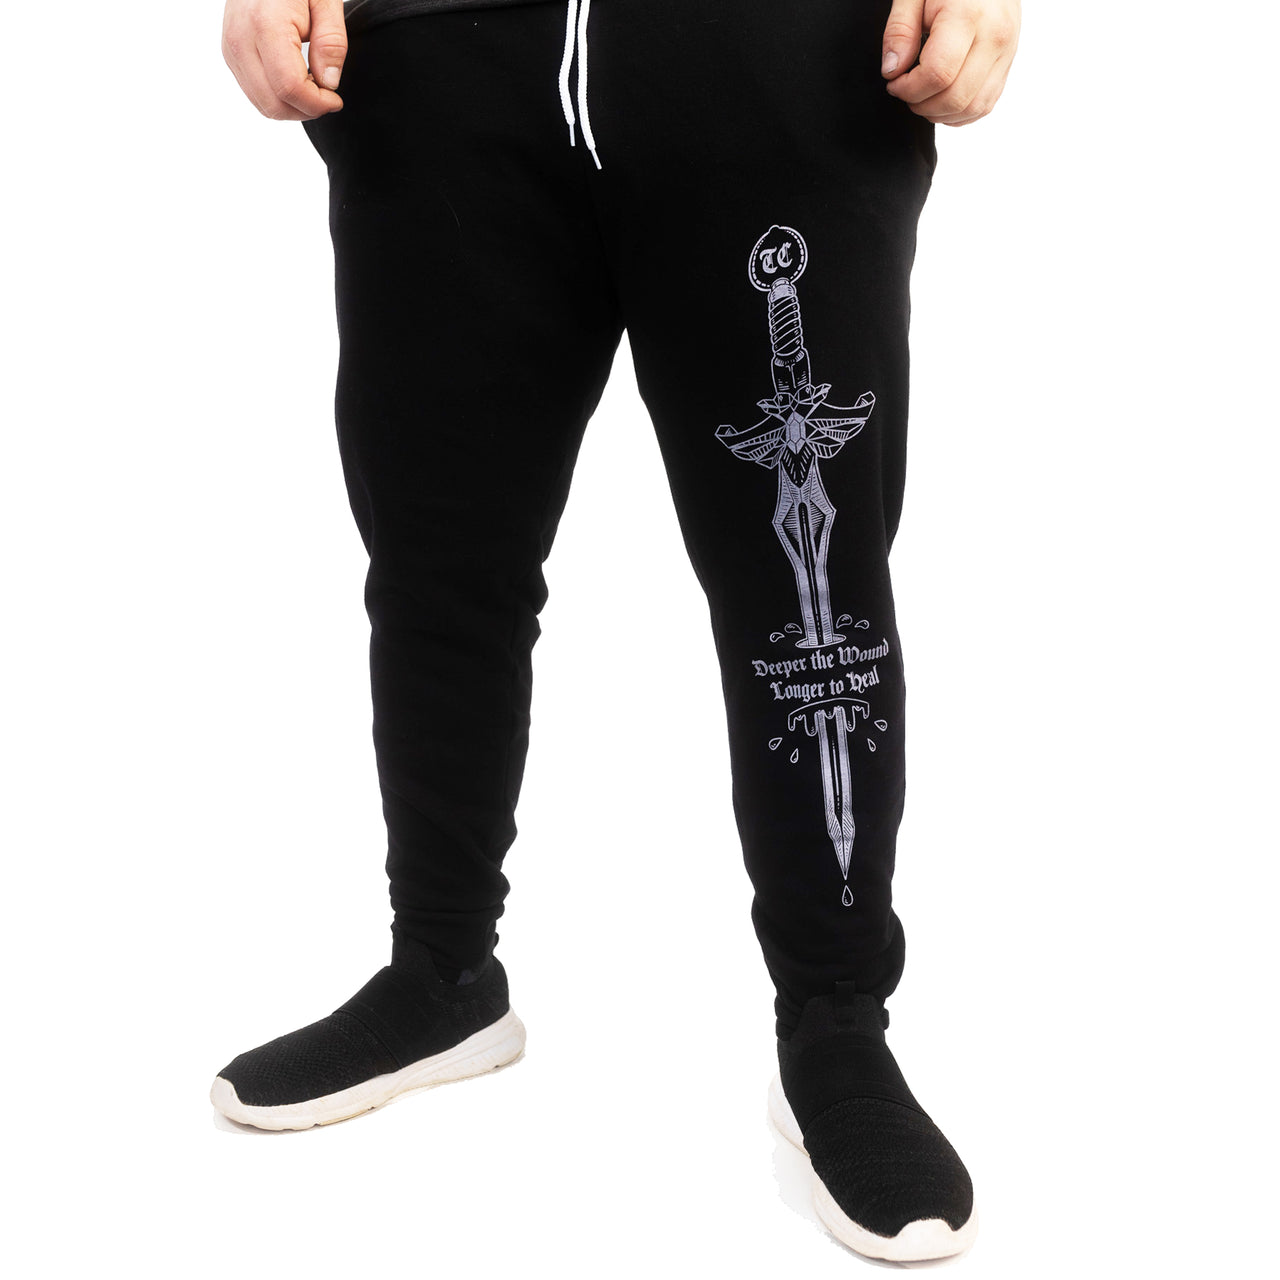 Deeper the Wound Sword Joggers